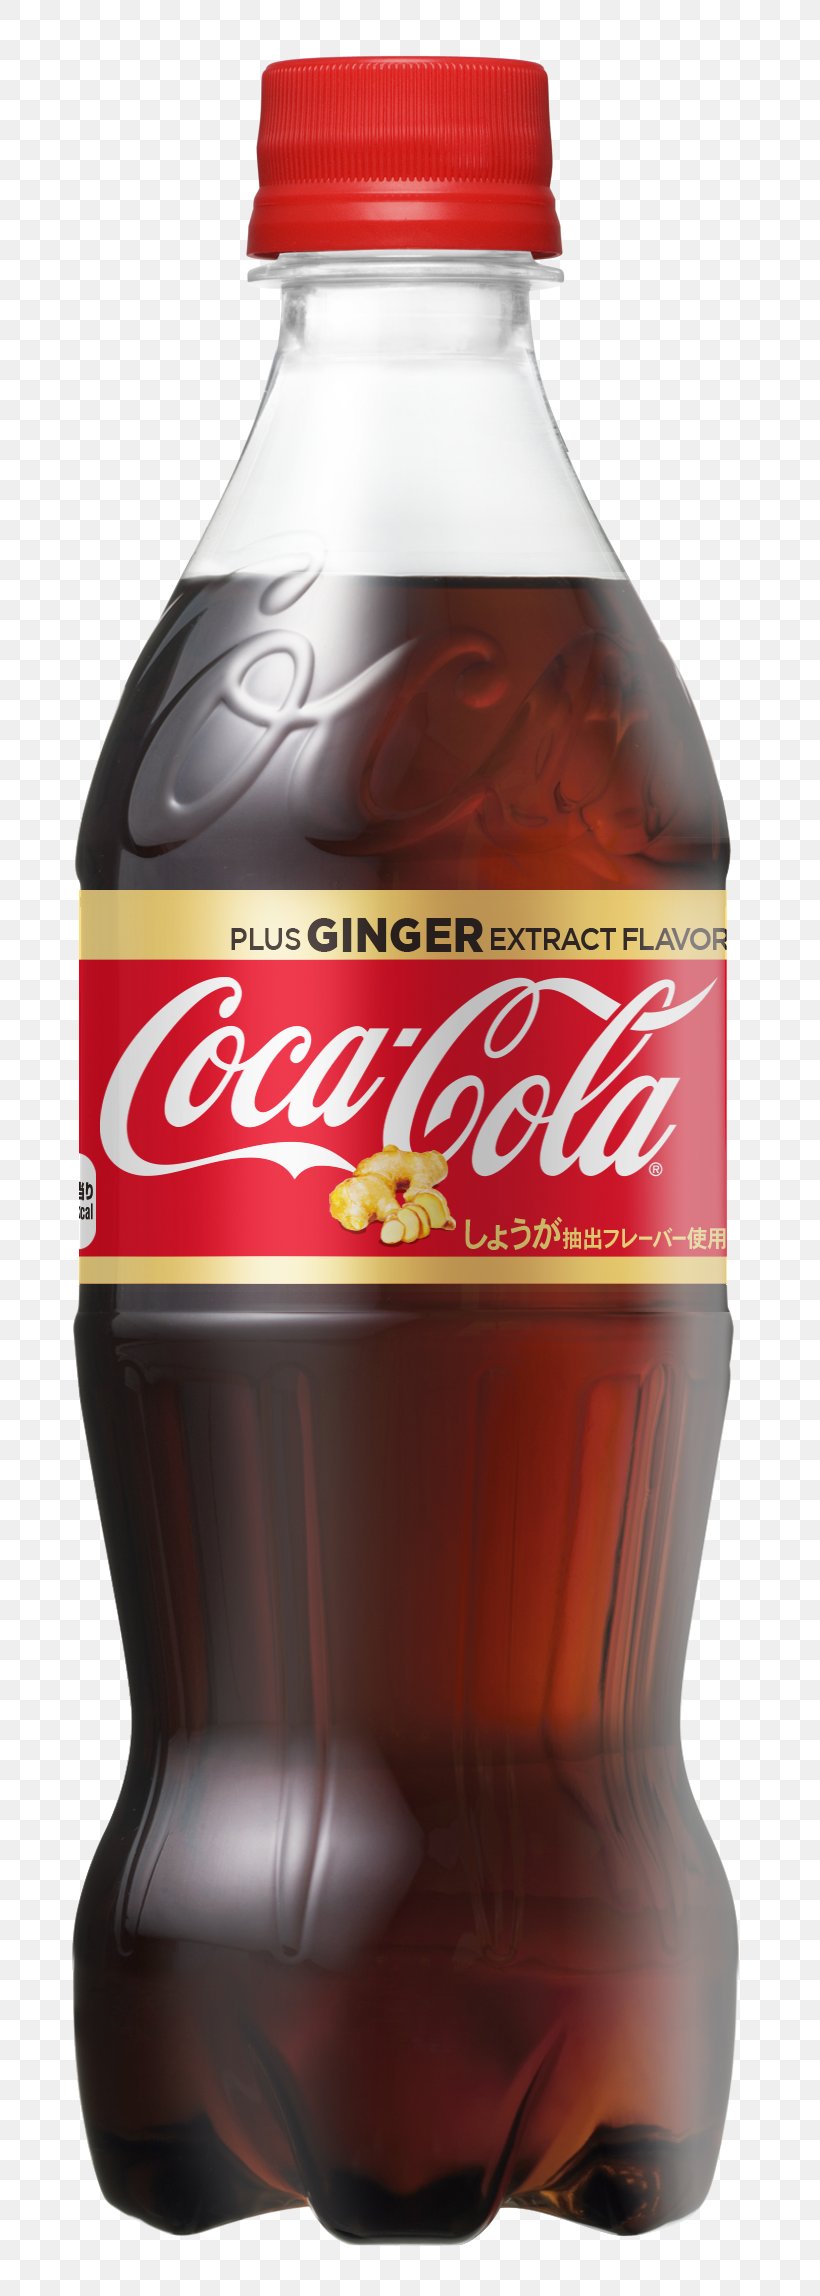 Coca-Cola Cherry Fizzy Drinks Glass Bottle, PNG, 788x2296px, Cocacola, Aphrodisiac, Bottle, Caffeine, Carbonated Soft Drinks Download Free